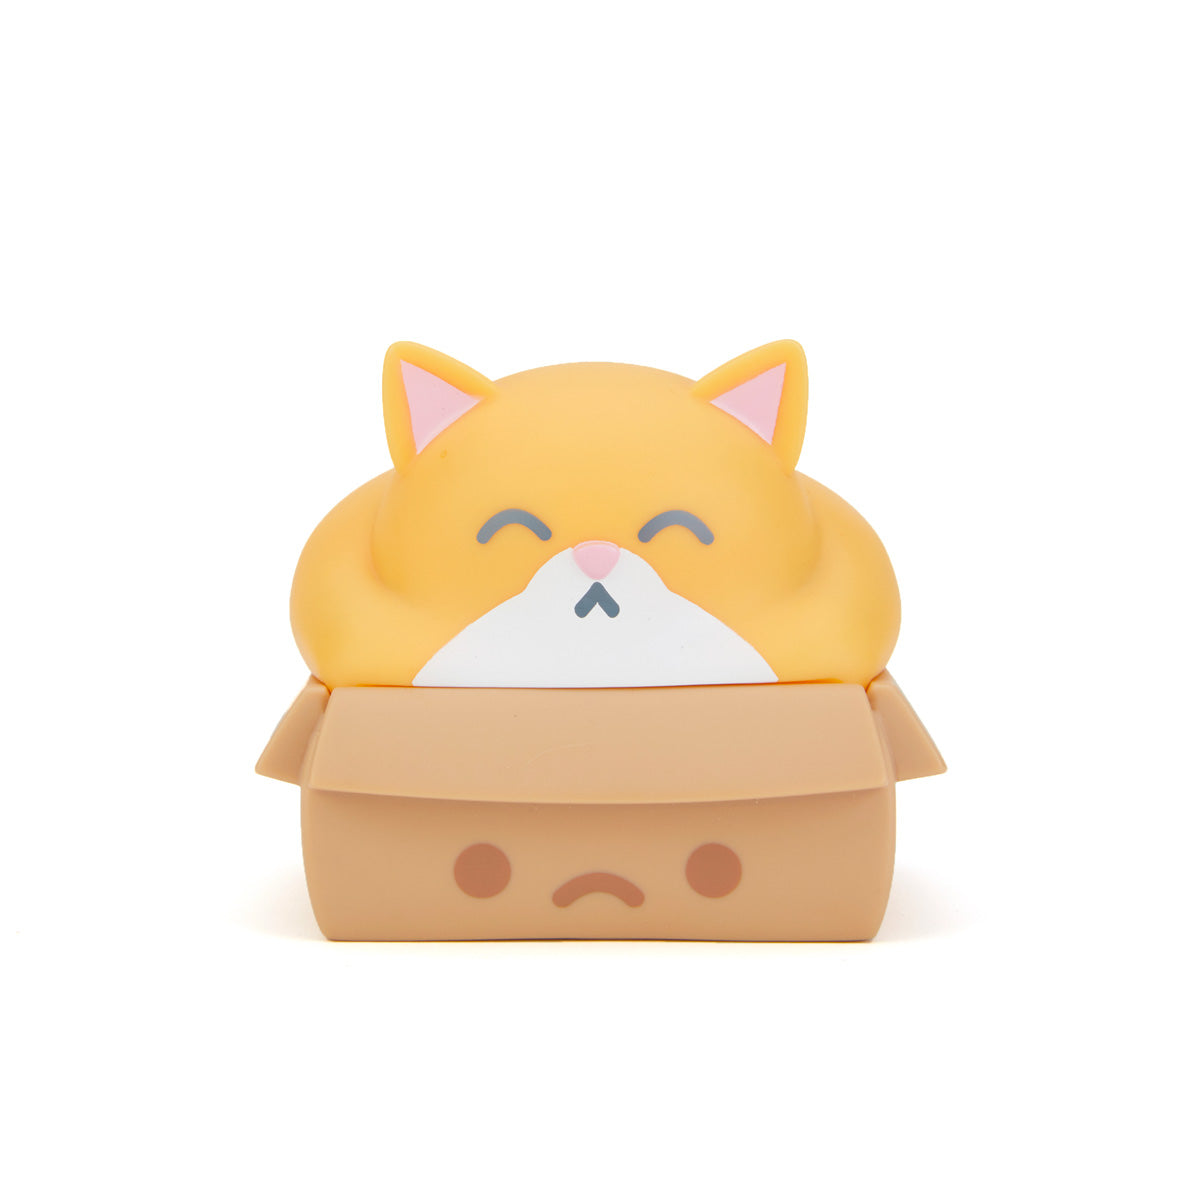 Chonky Trash Kitty Night Light pictured in full light on a white background